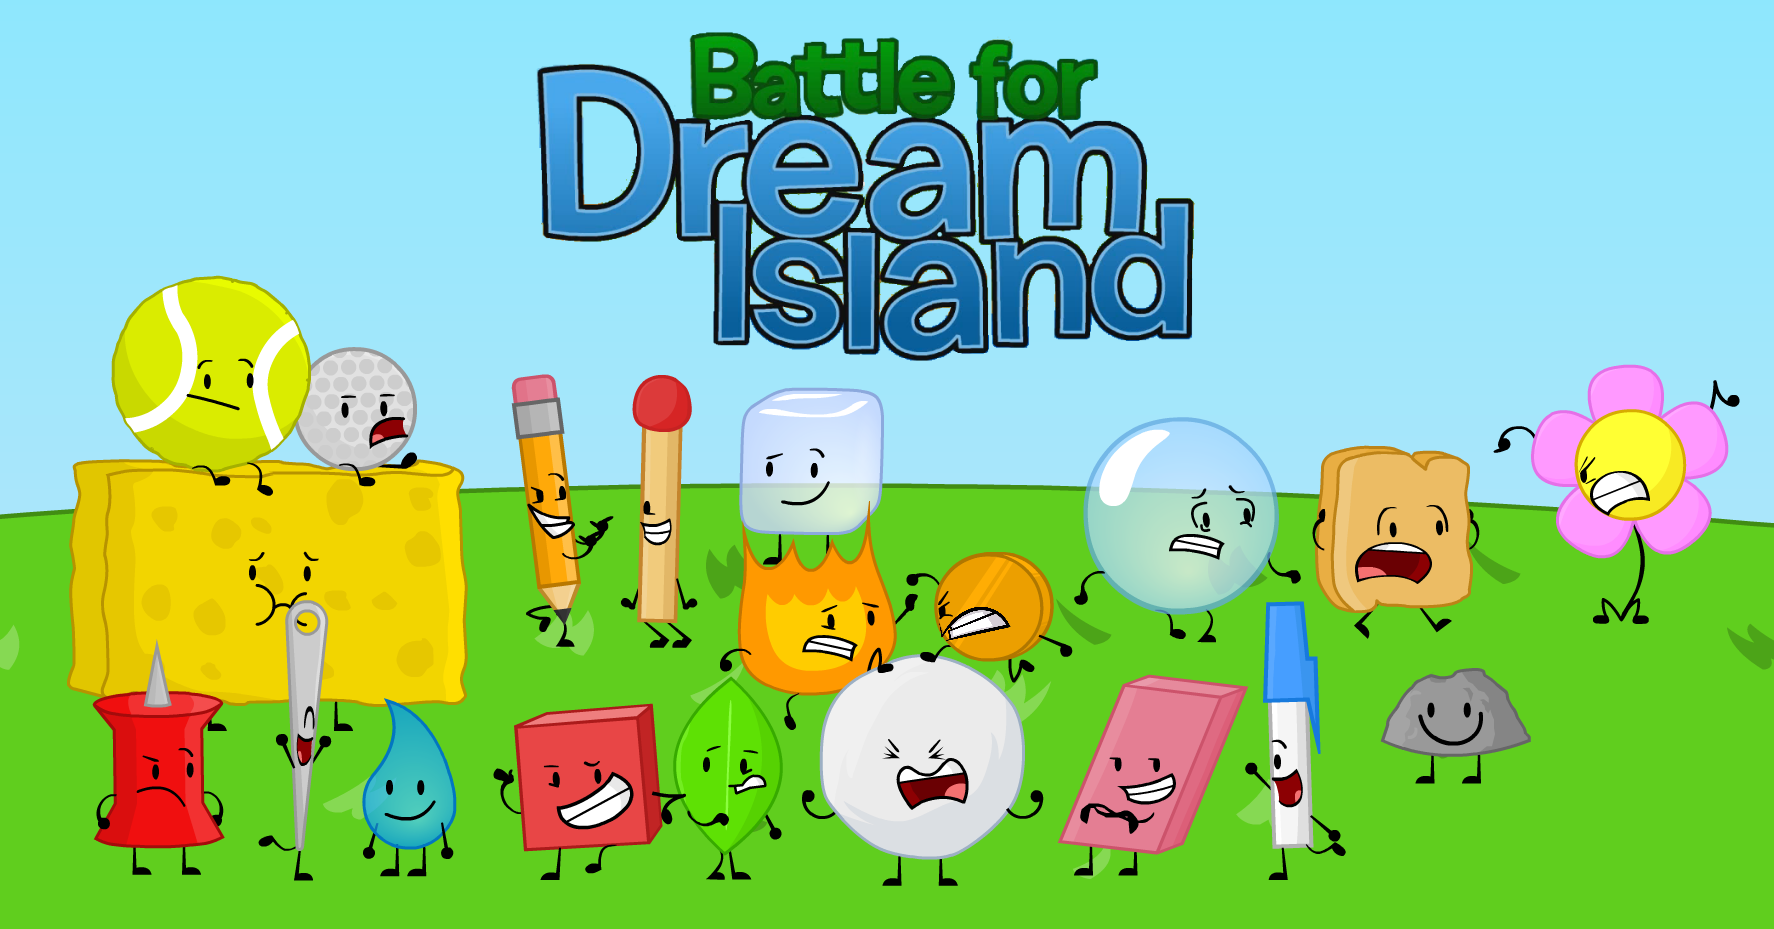 Battle For Dream Island Wallpapers - Wallpaper Cave.